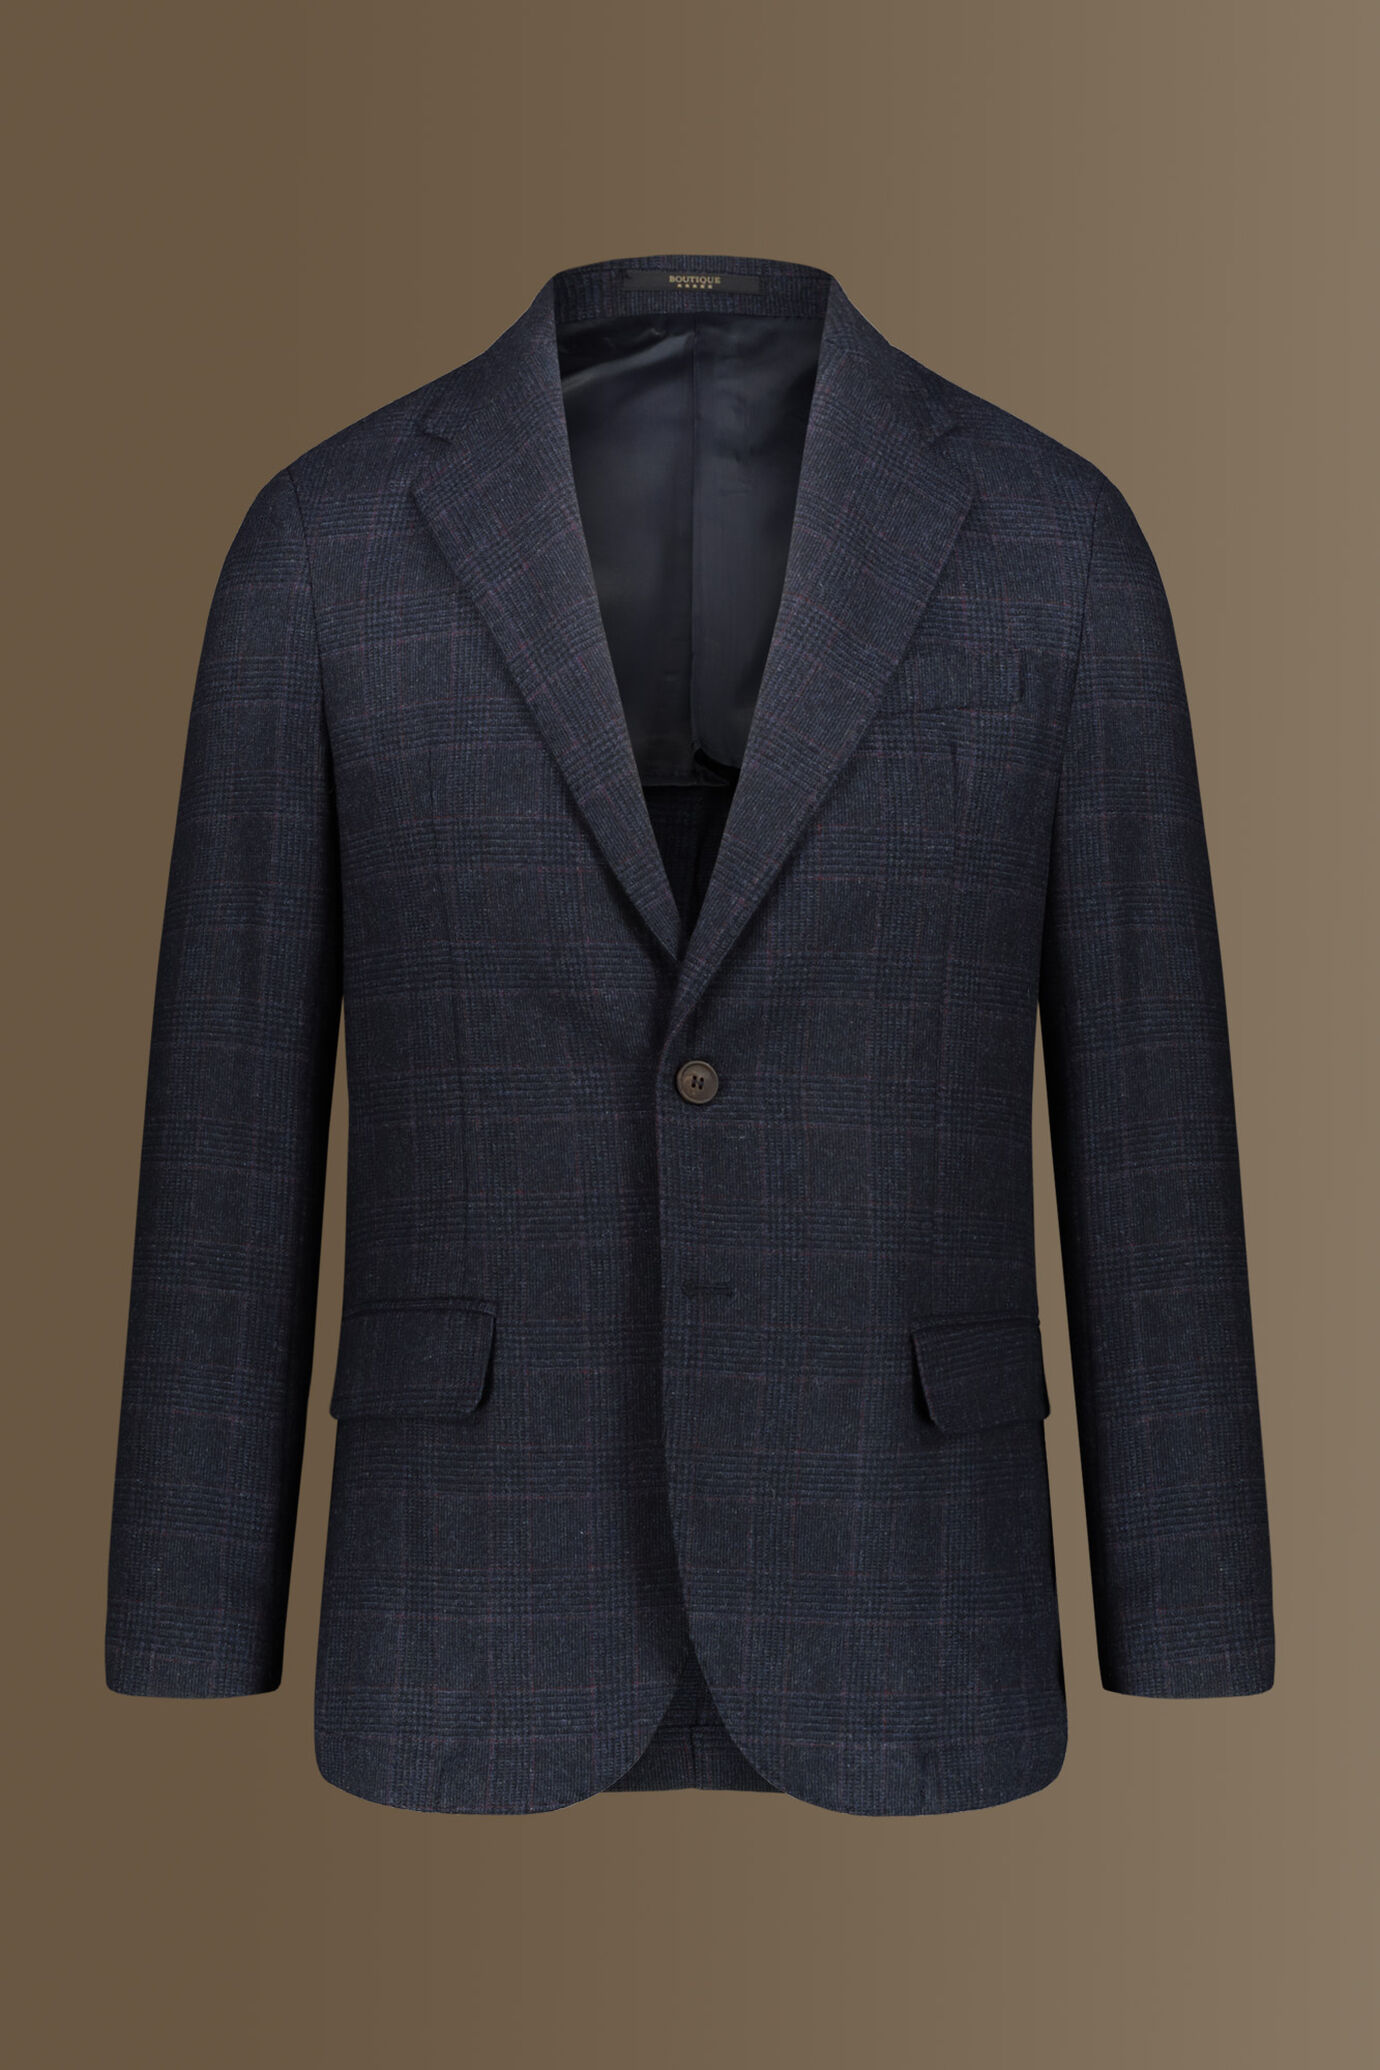 Single breasted Jaket, wool blend, fheck design. Made in italy image number 0